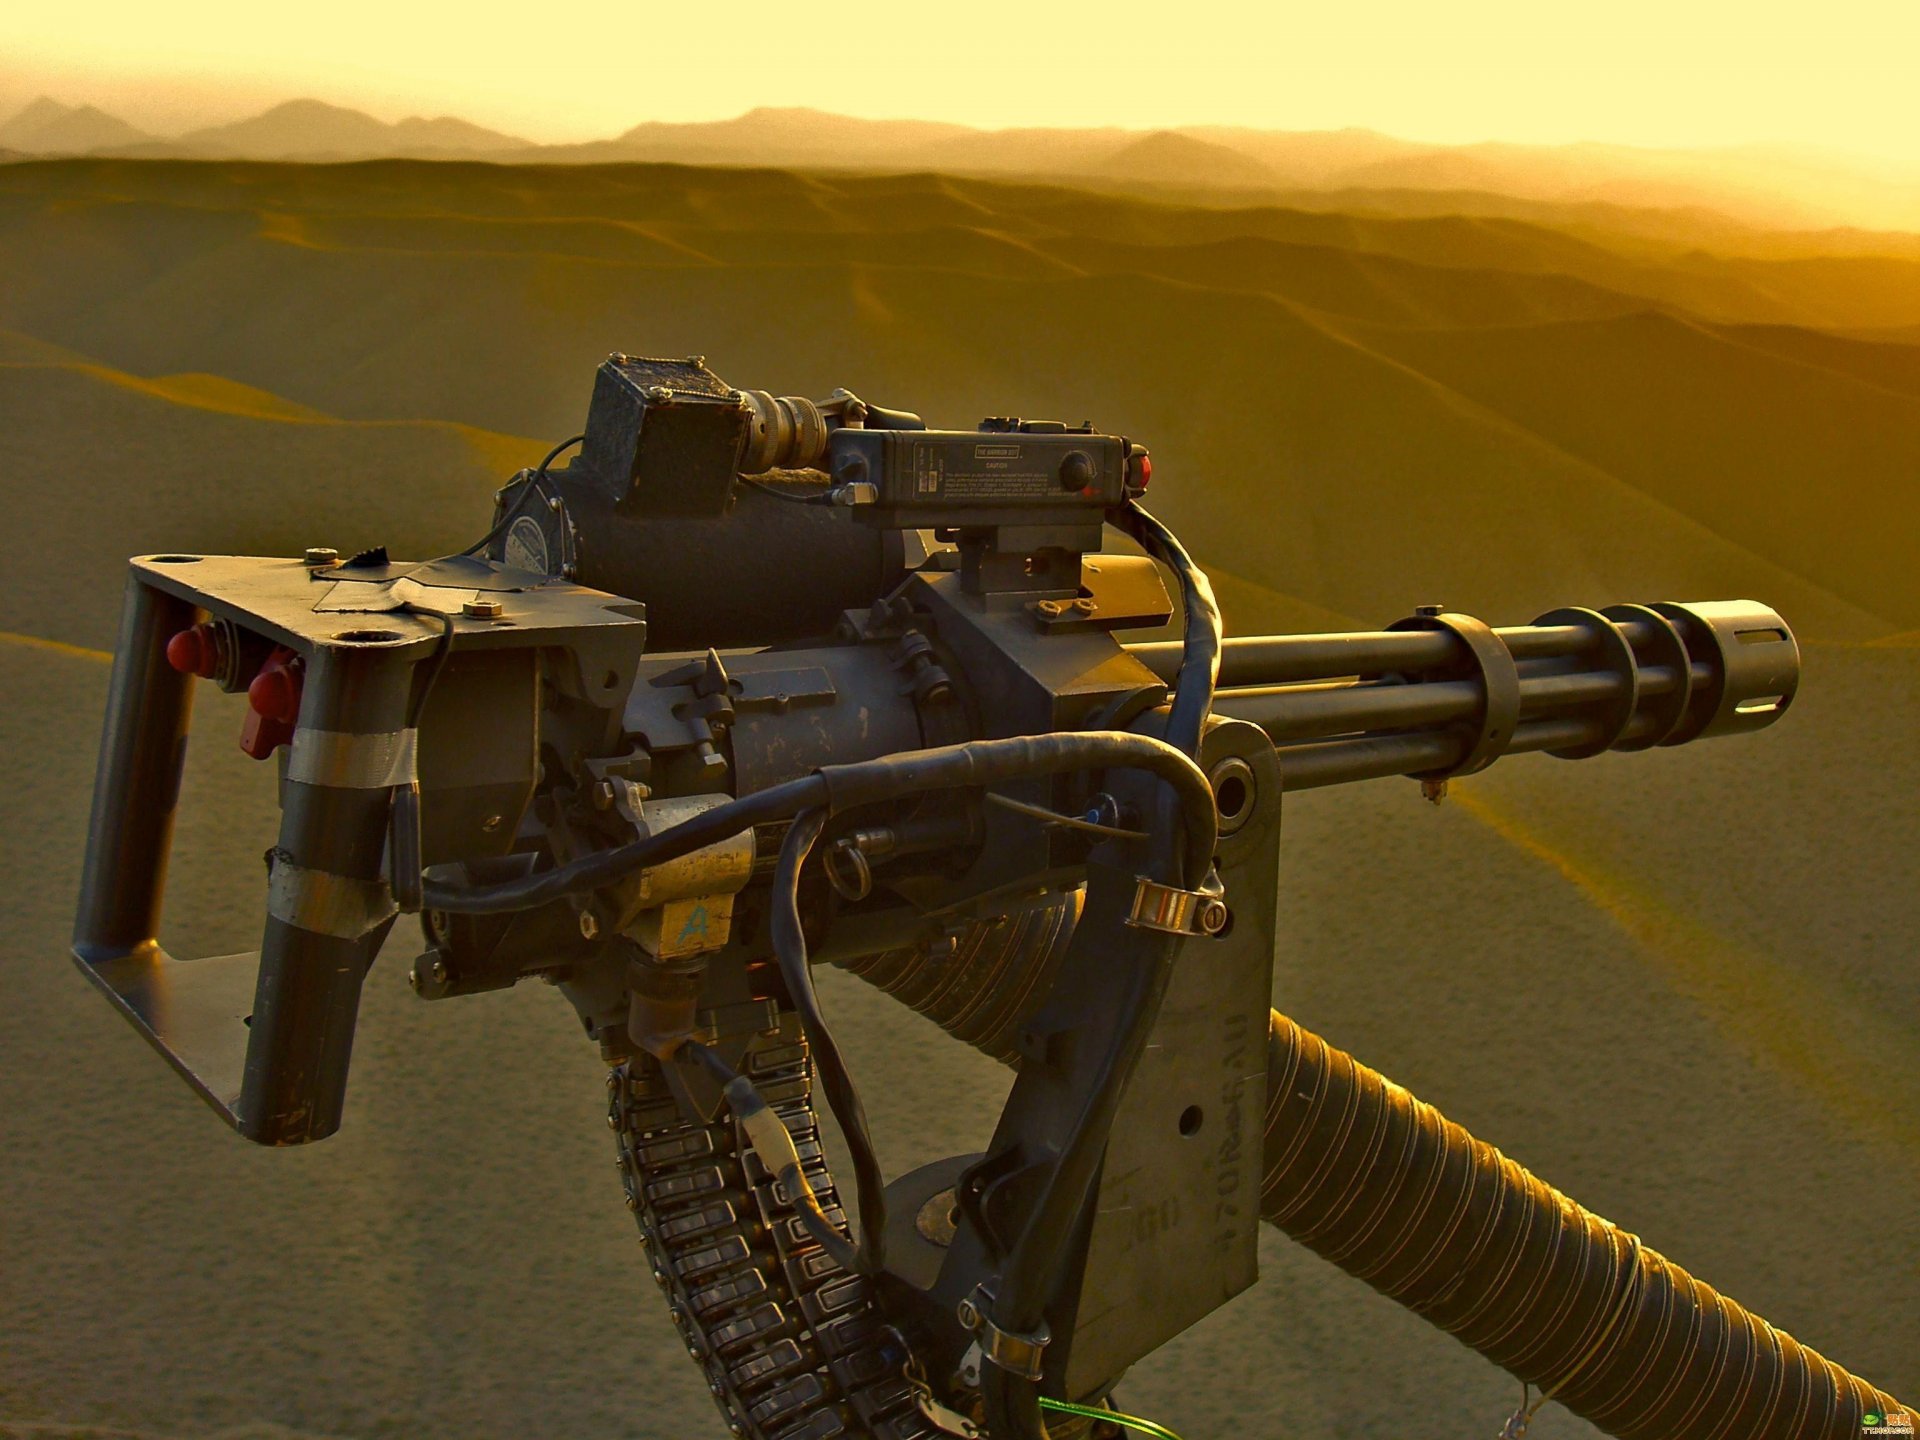 Weapons from a helicopter at sunset